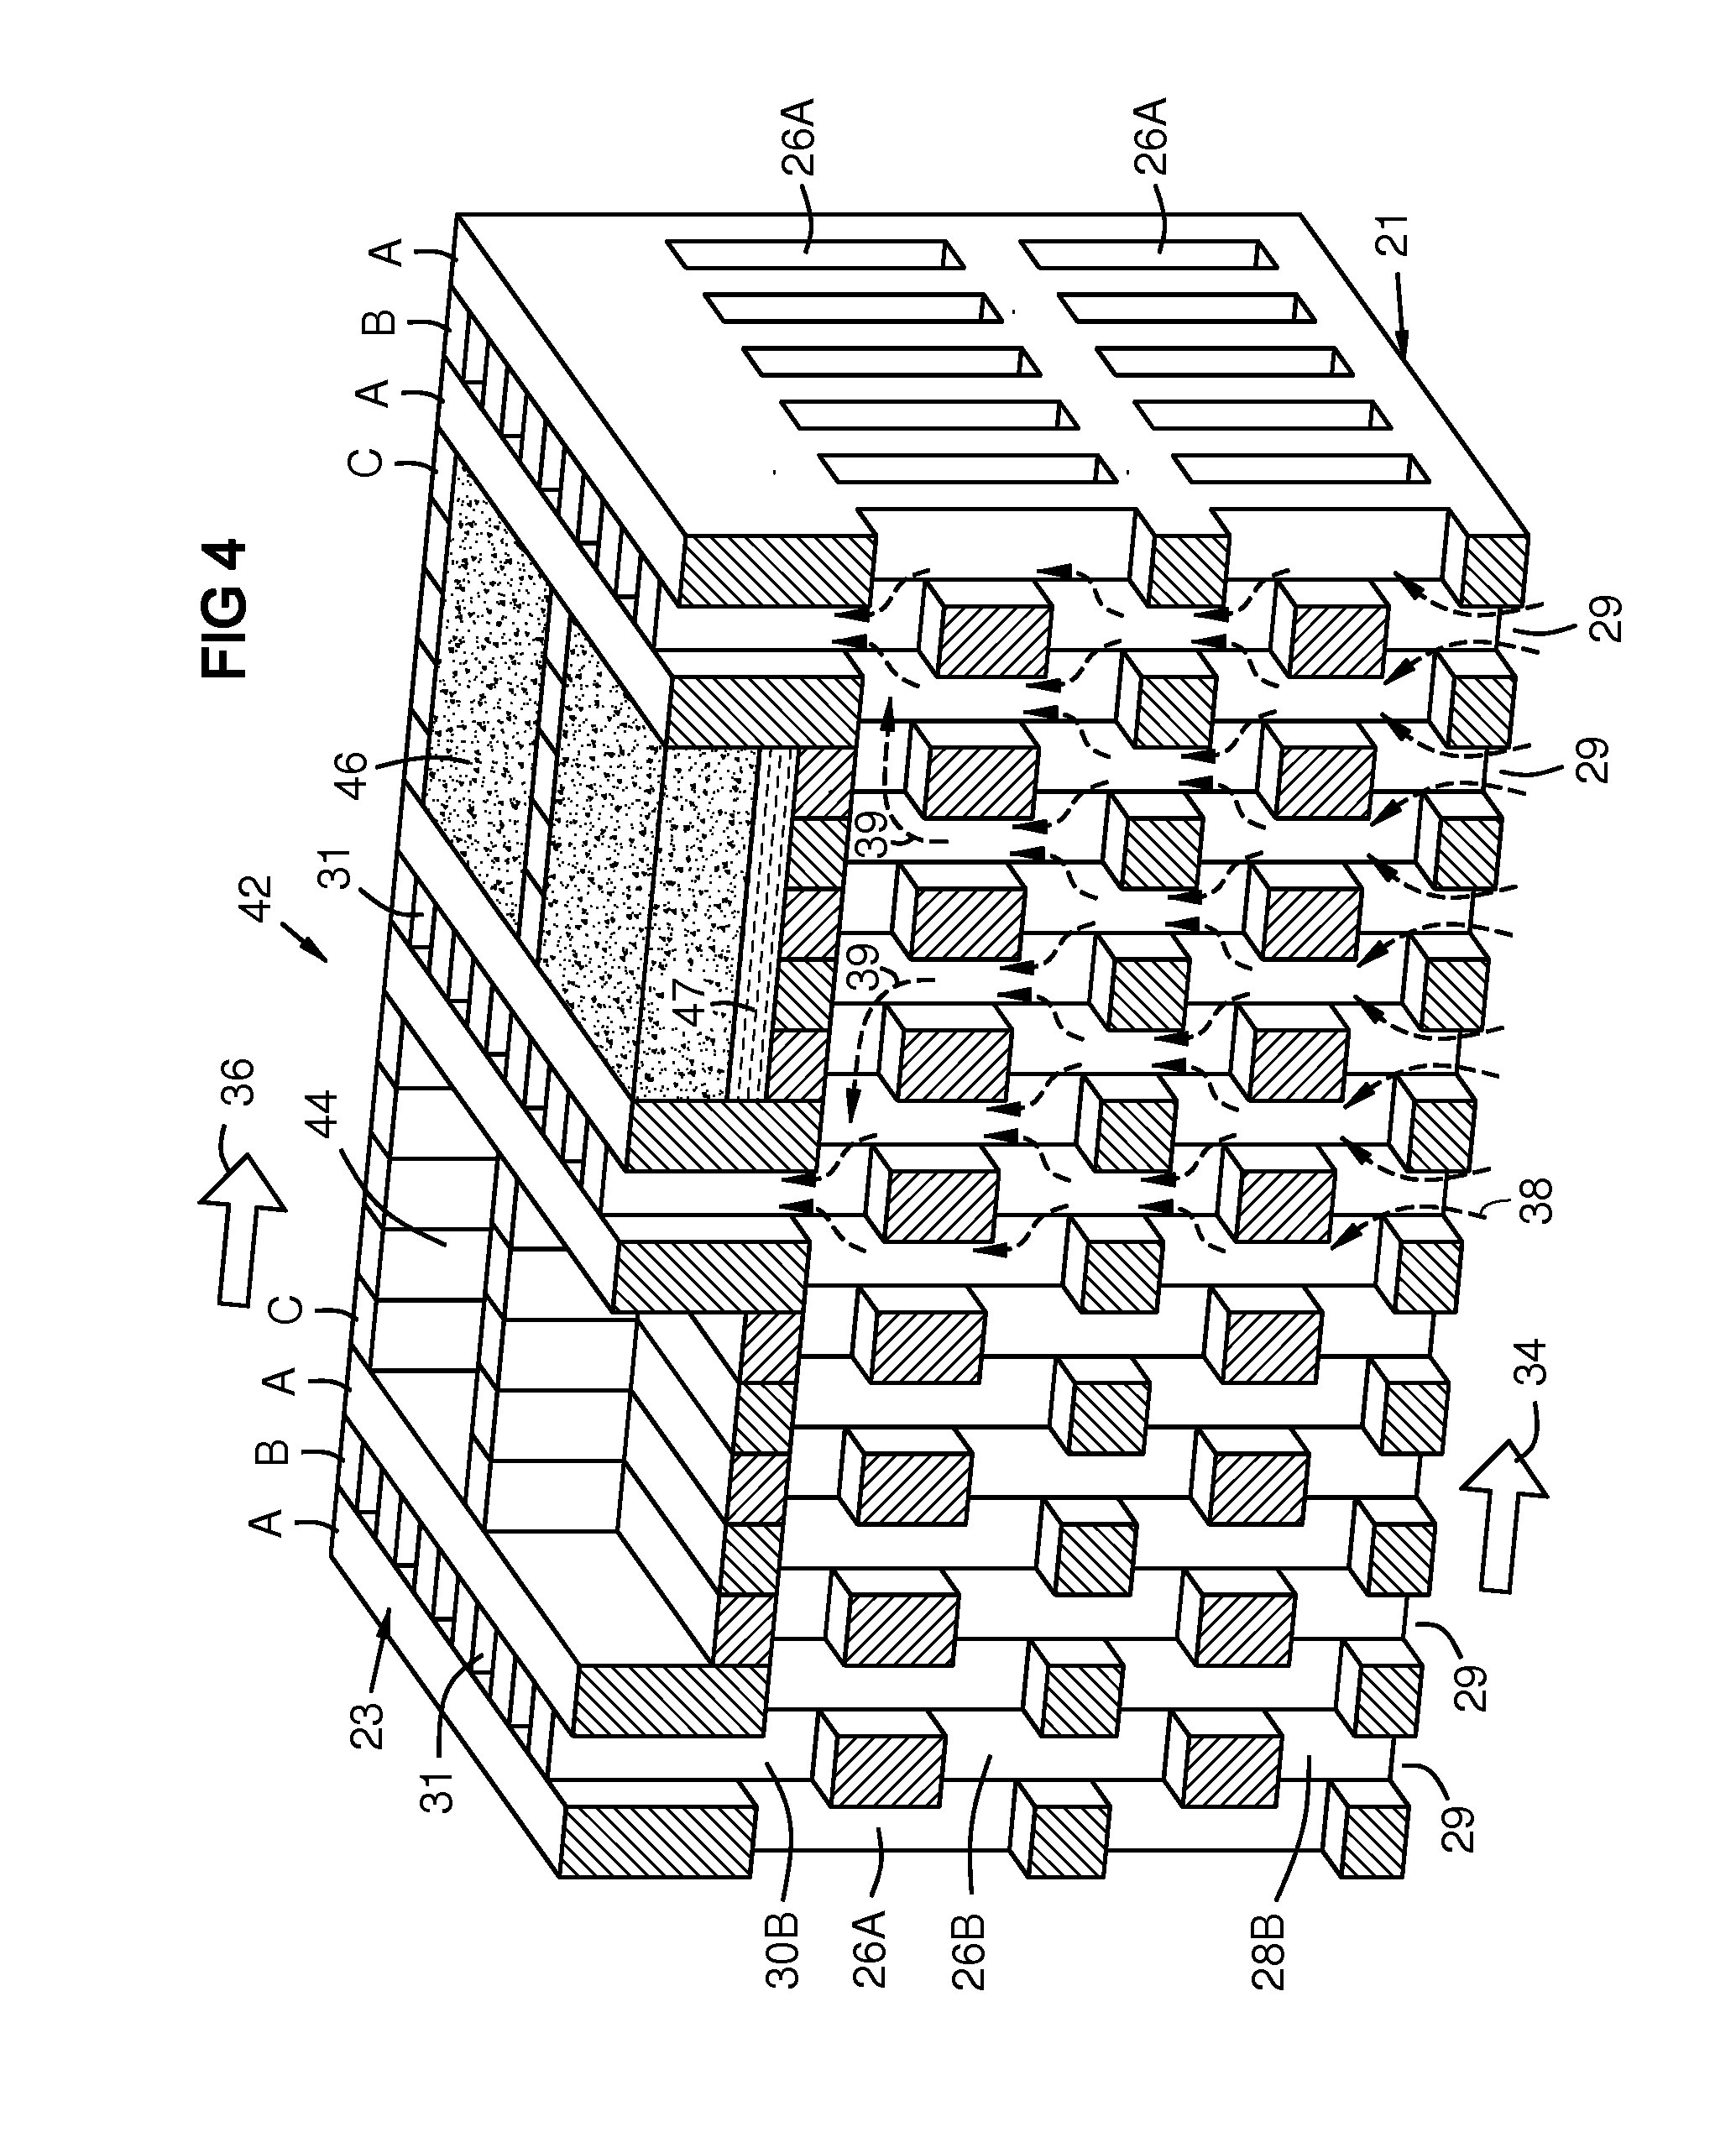 Discreetly Defined Porous Wall Structure for Transpirational Cooling